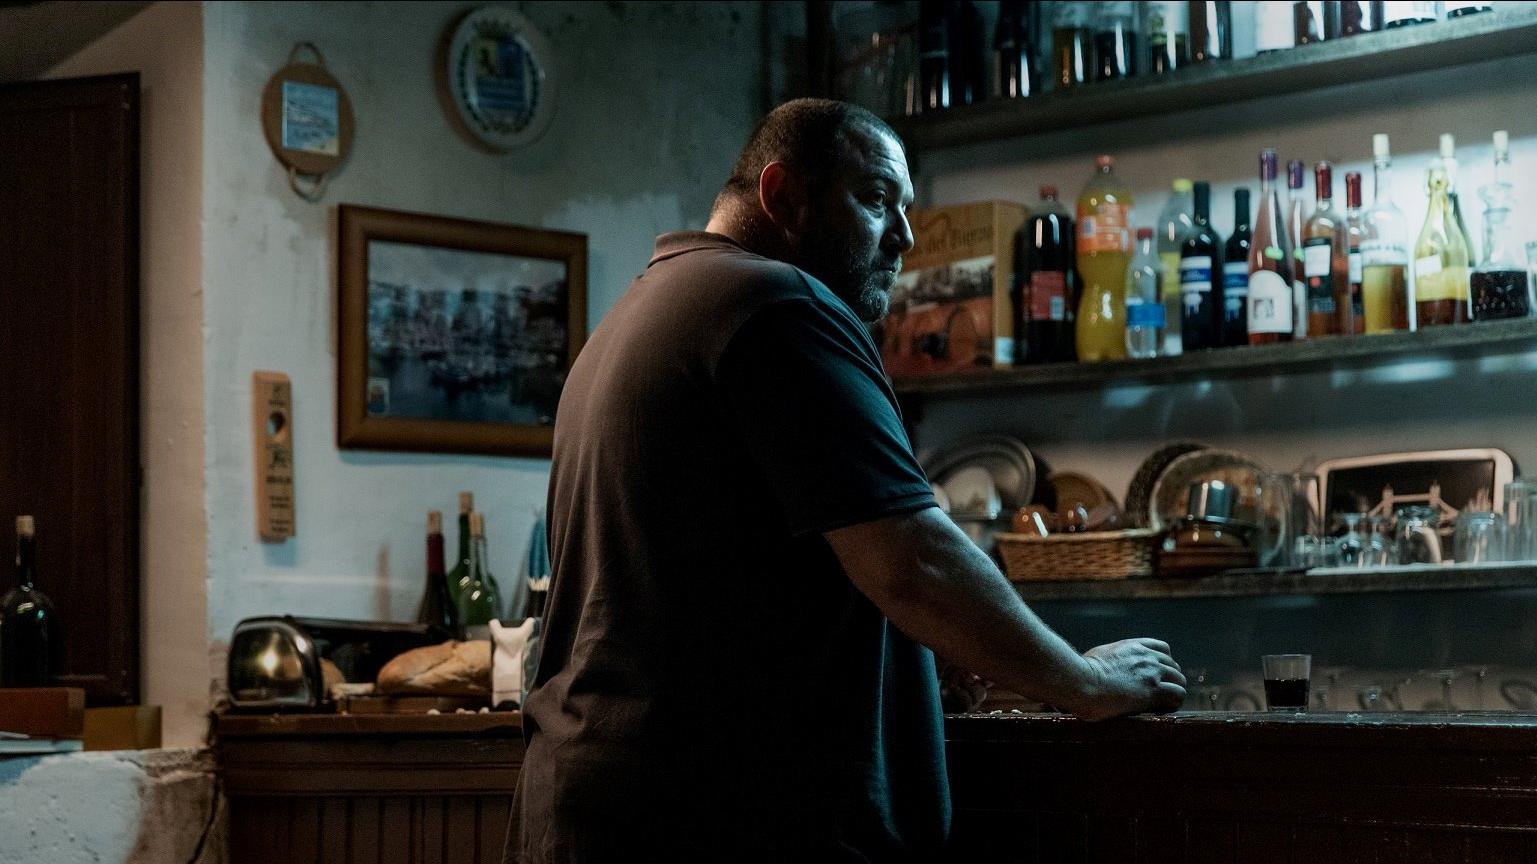 A man standing in a dimly lit kitchen leaning against the counter.